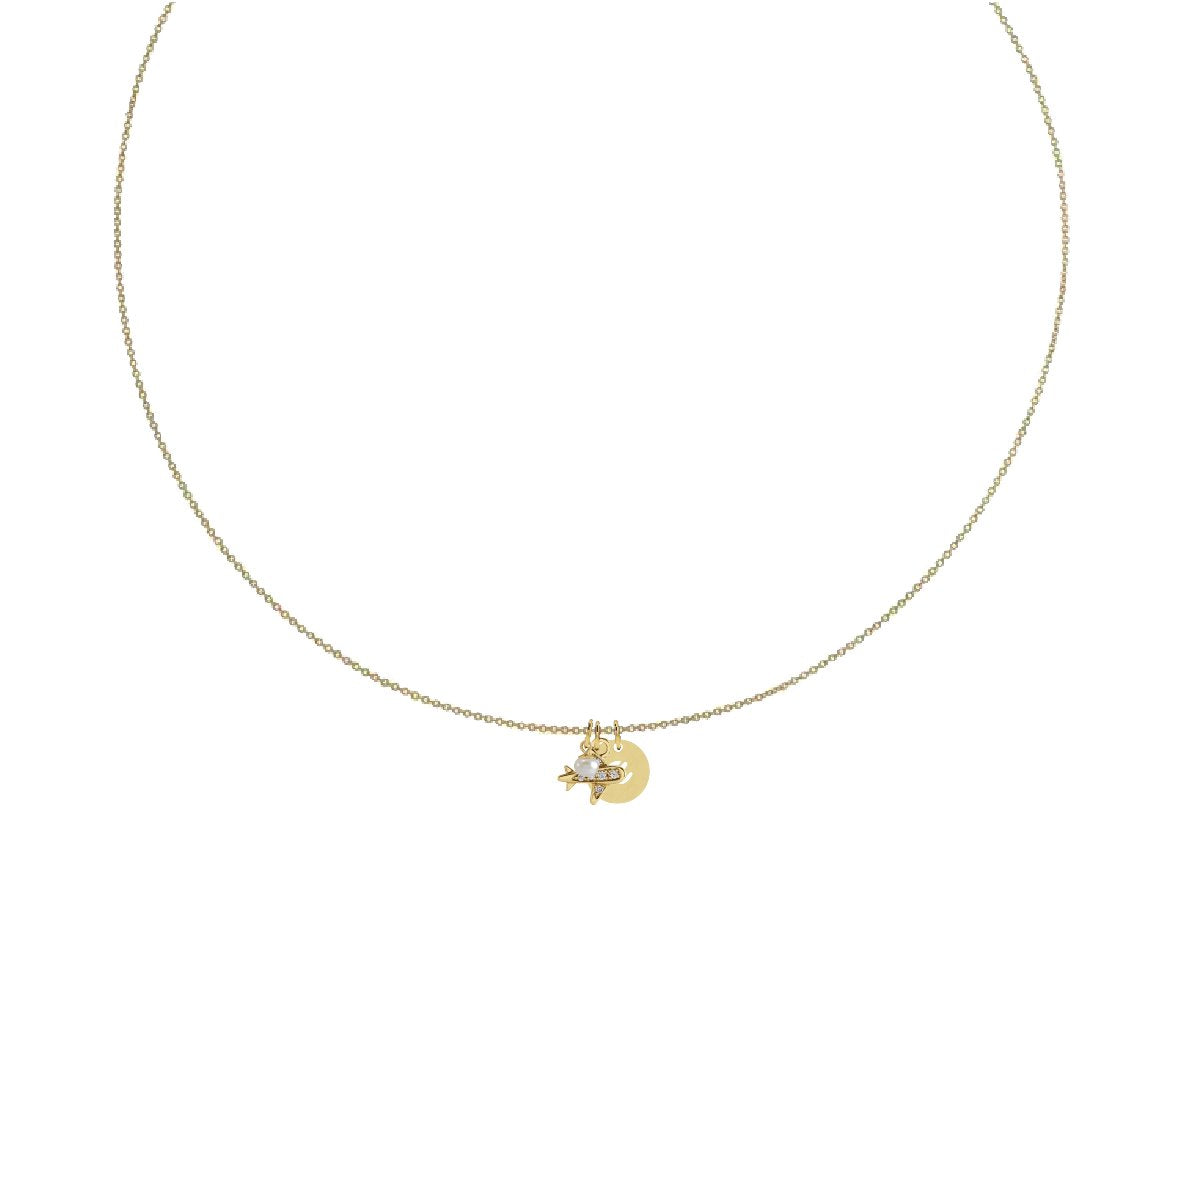 Charm Collection - For the Jet Setter Robyn Canady Charm + 14K Gold Filled Chain Add a Pearl and Initial (Leave initial selection in notes) 